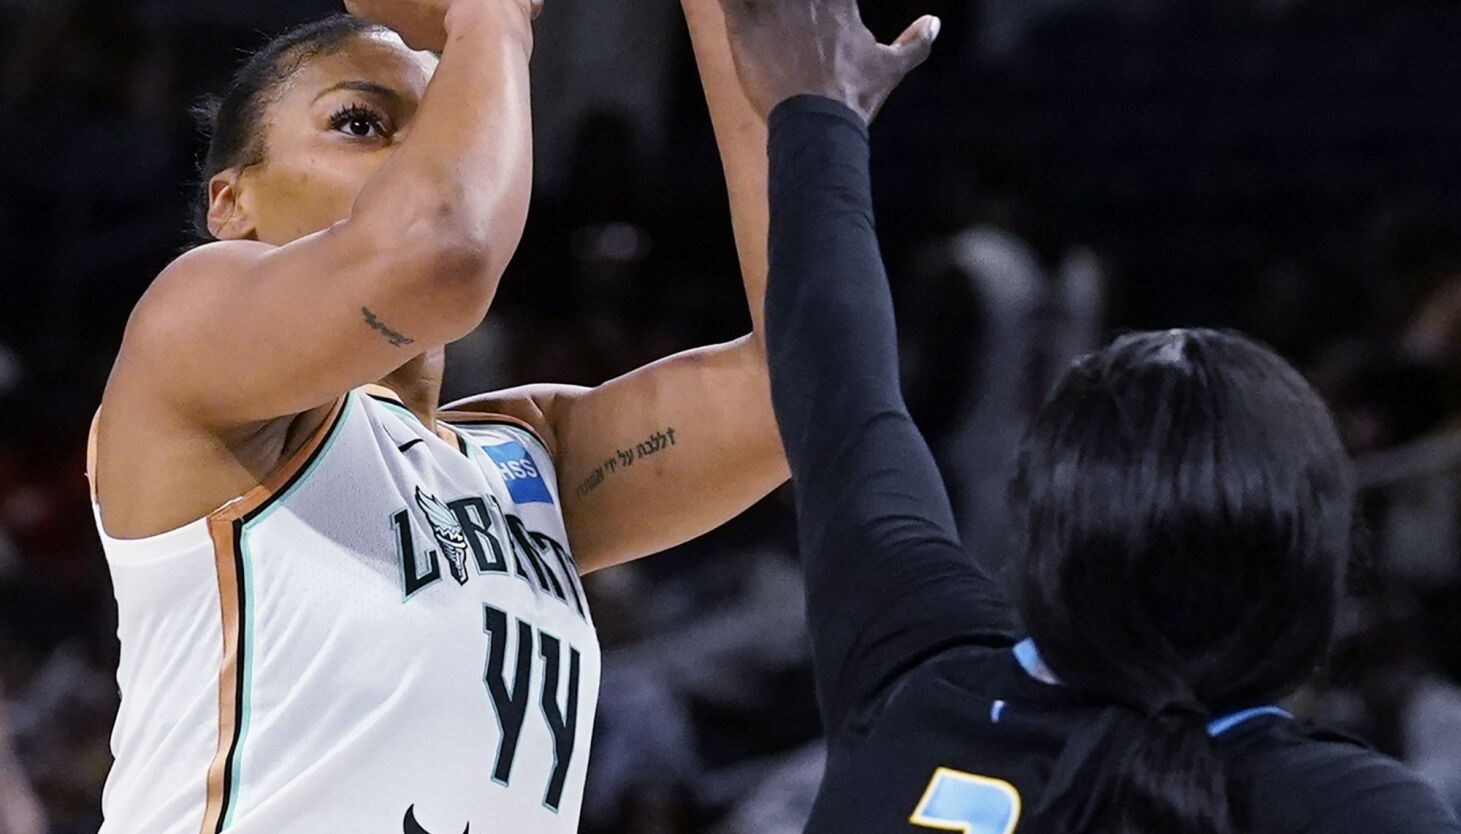 Liberty's Betnijah Laney named to her first WNBA All-Star team